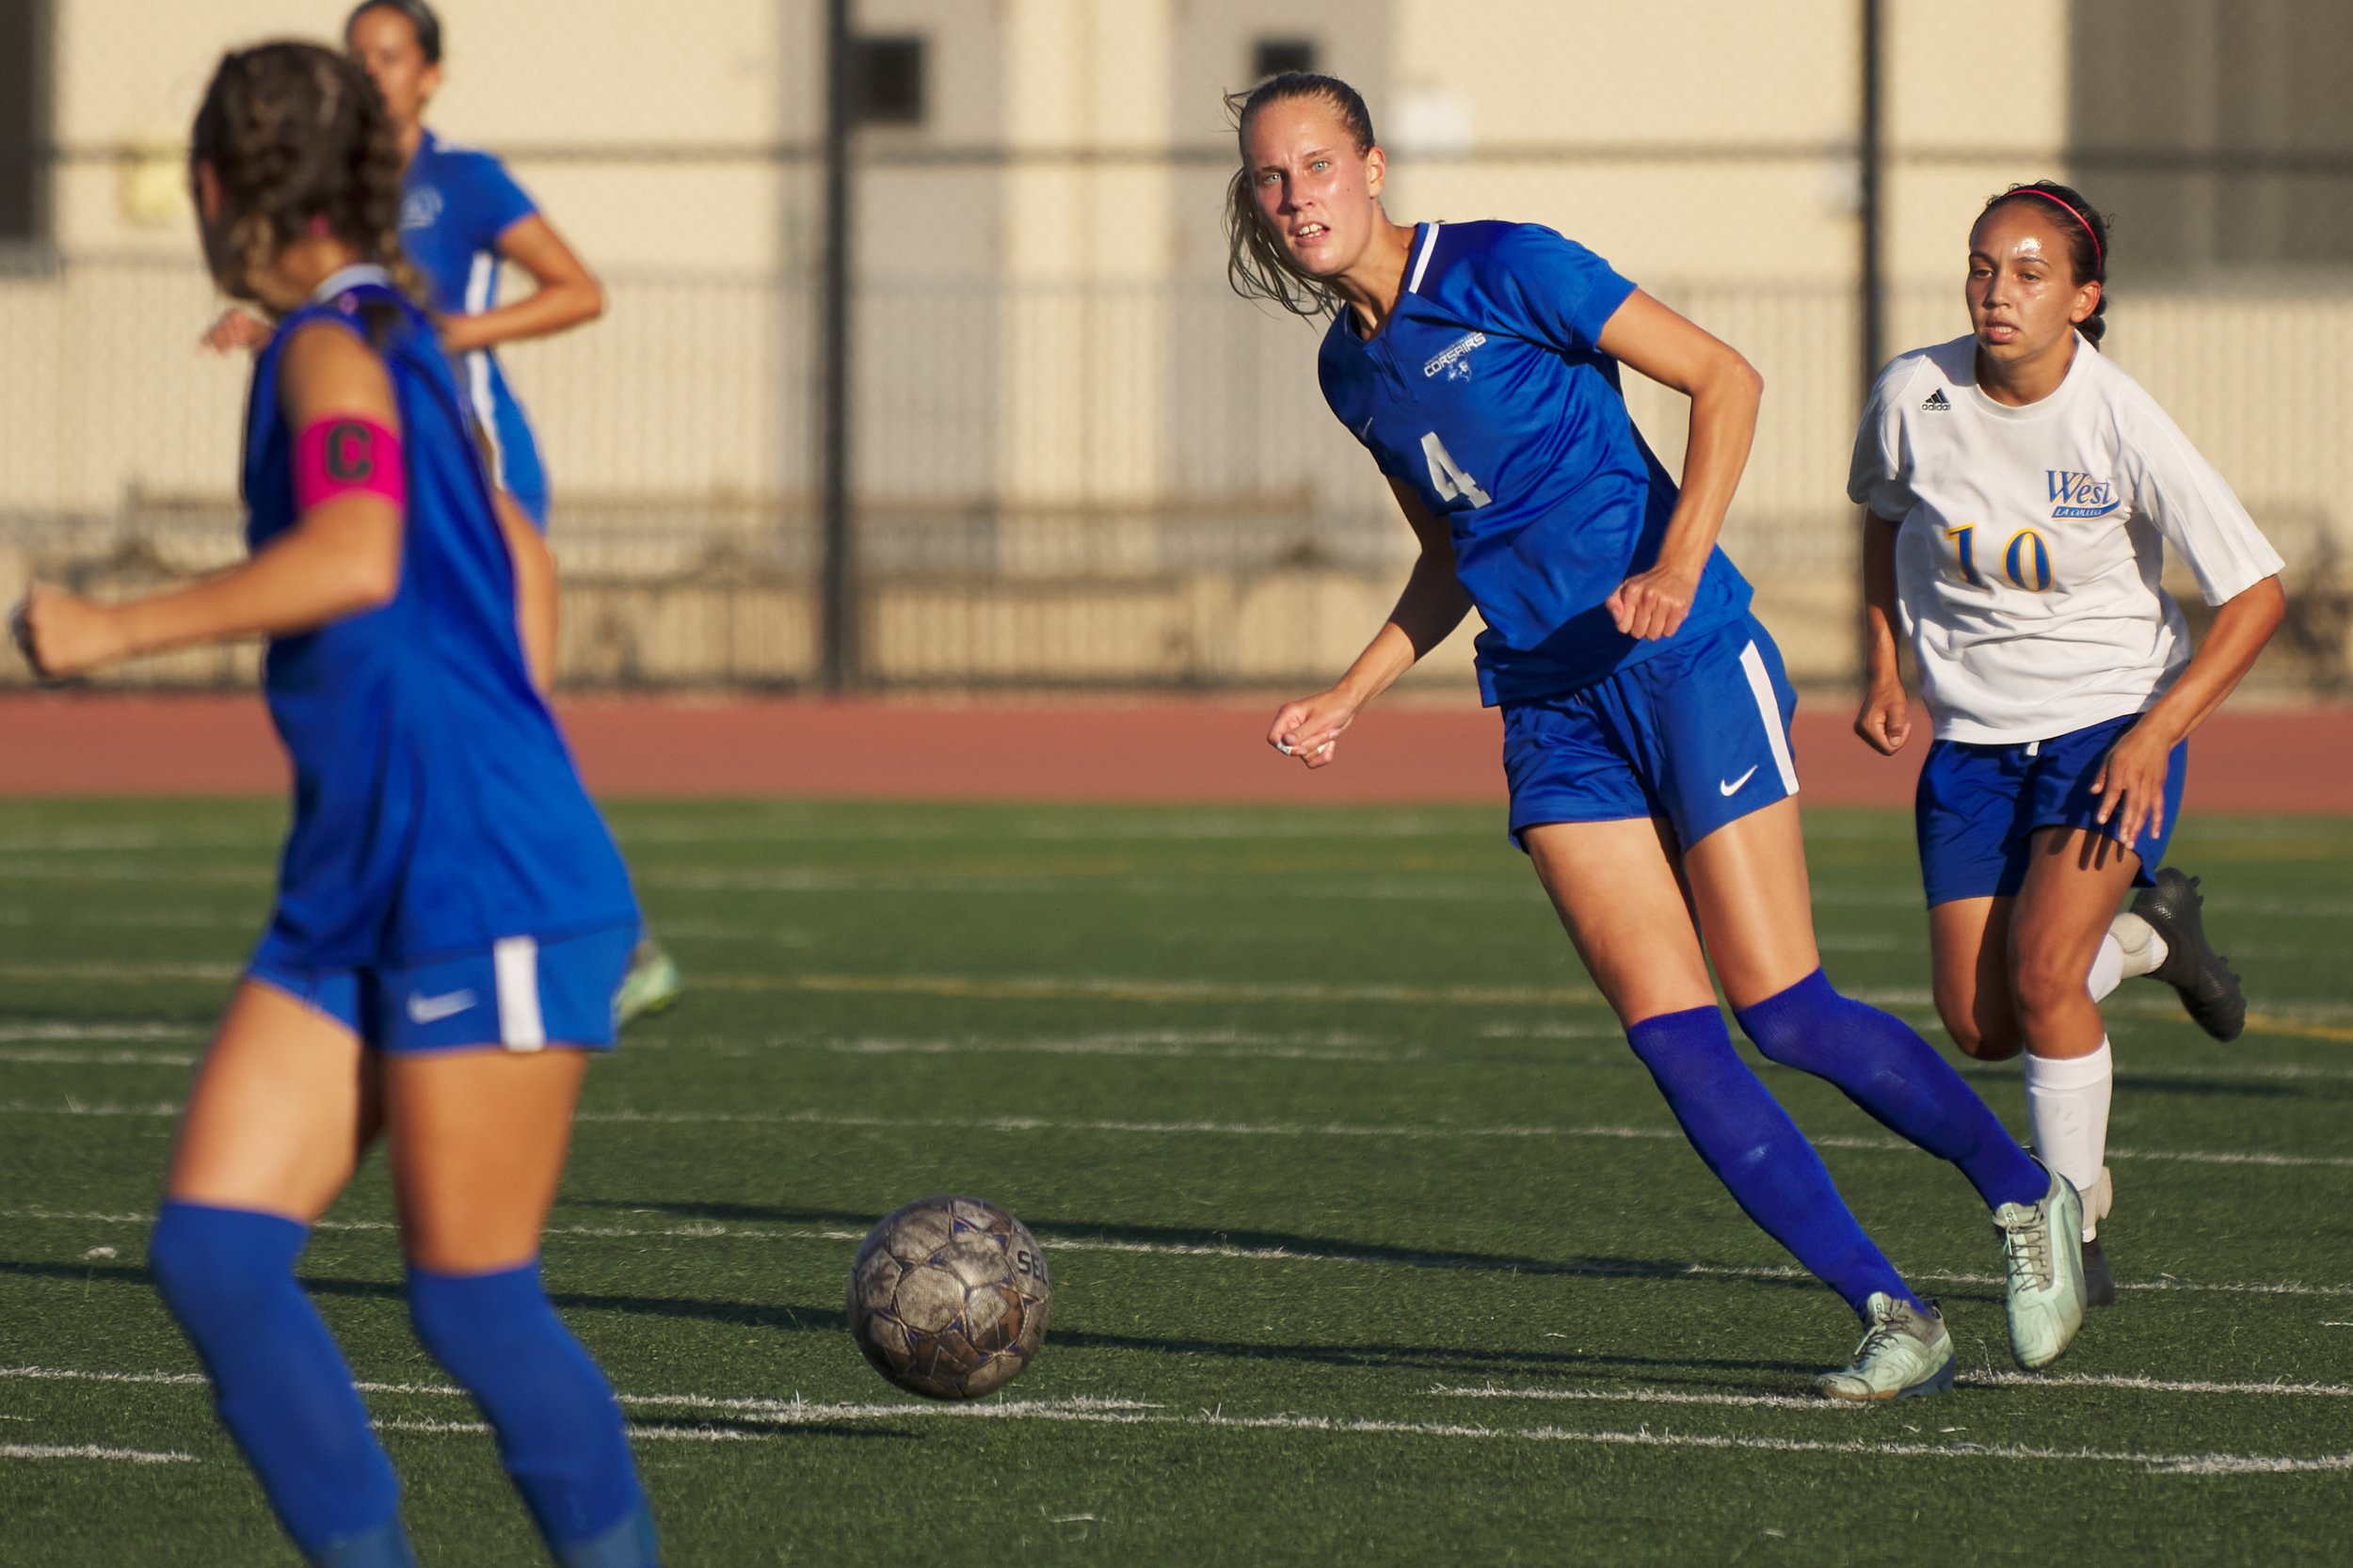  With West Los Angeles College Wildcats' Leslie Flores (right) close behind, Santa Monica Corsairs' Emma Rierstam (center) sends the ball to Sophie Doumitt (left) during the women's soccer match on Friday, Sept. 30, 2022, at Corsair Field in Santa Mo